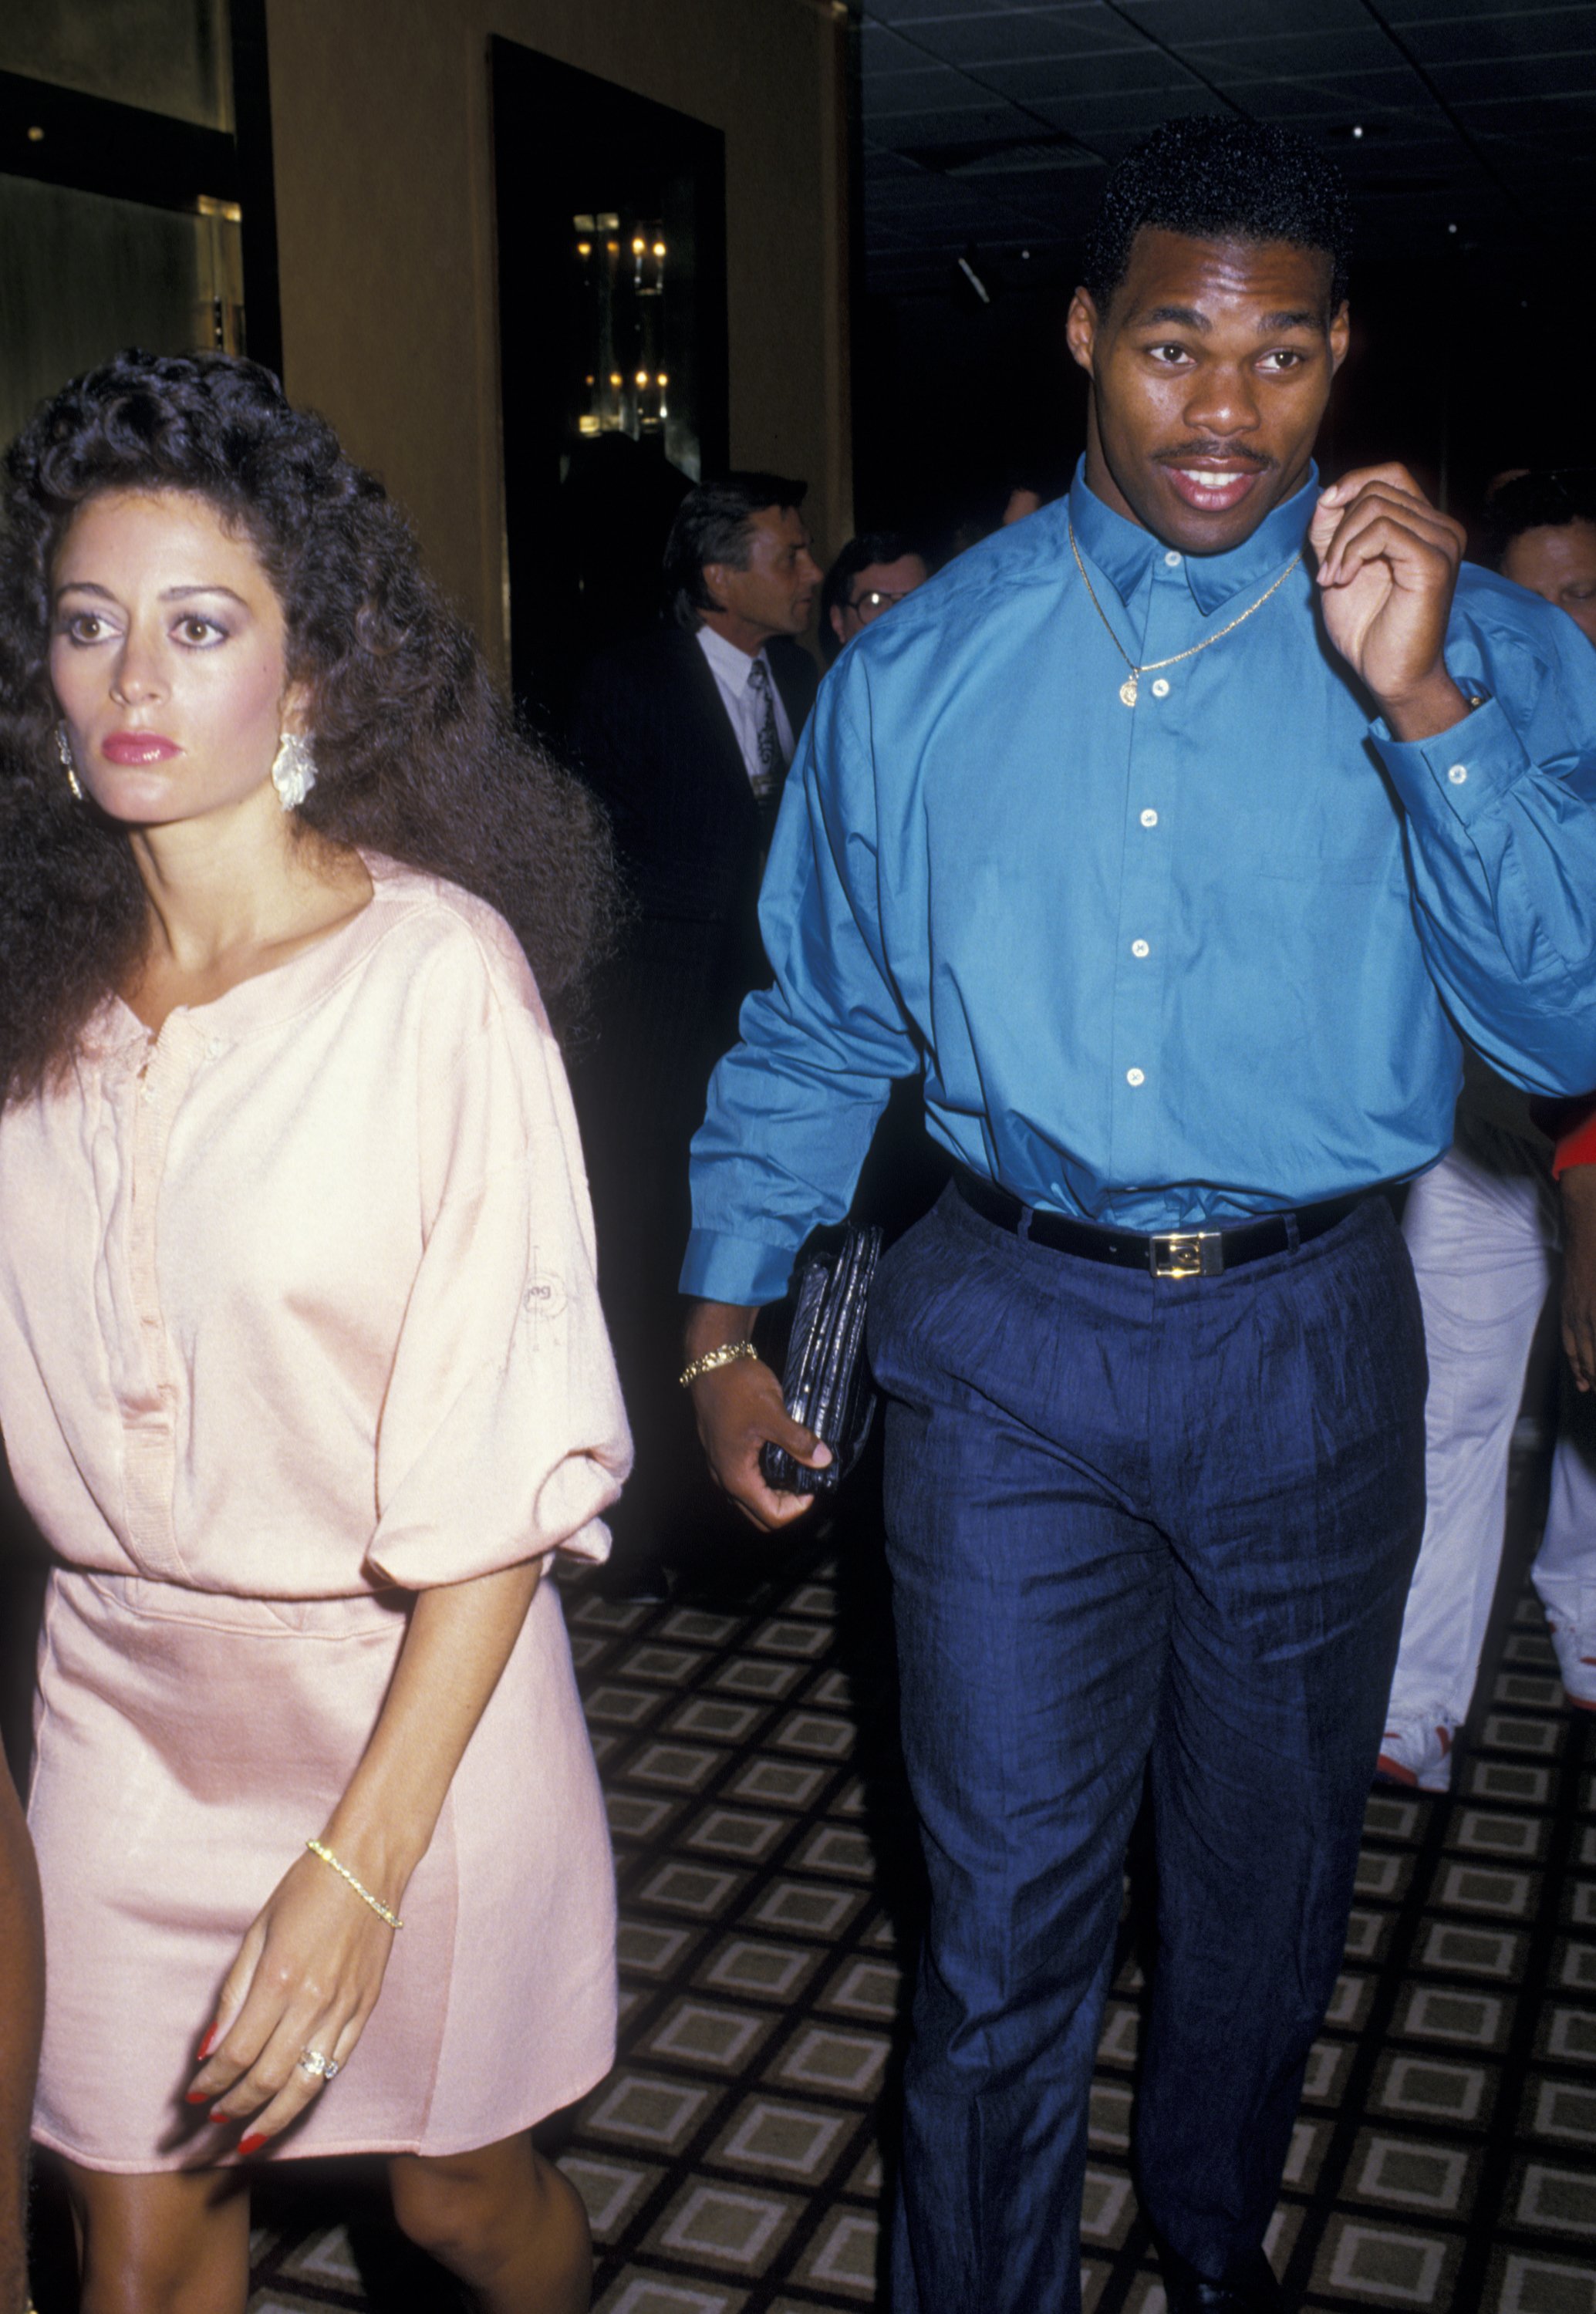 Herschel Walker, along with Cindy Deangelis Grossman, at the Tyson vs. Spinks Boxing Match on June 27, 1988, in Atlantic City, New Jersey. | Source: Getty Images